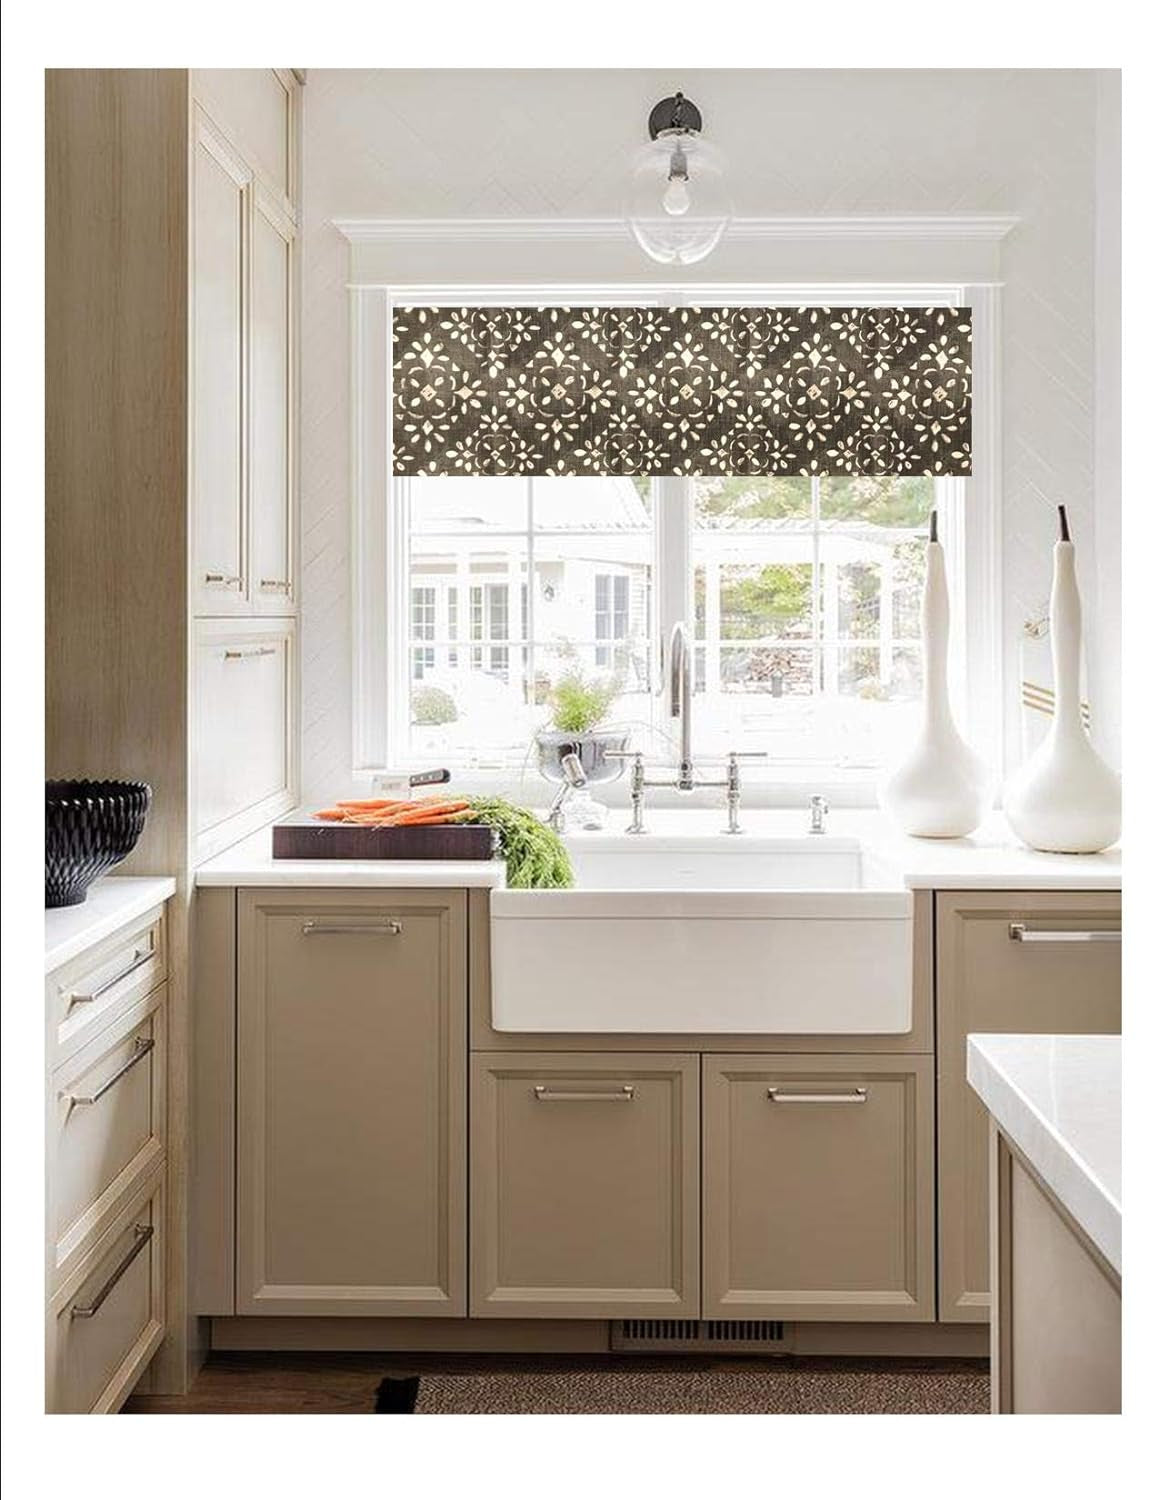 Custom Made Straight Valance in Avila Sable Grey Stencil Print, Fully Lined, Modern Farmhouse Kitchen Valance, Machine Wash, Ready to Hang